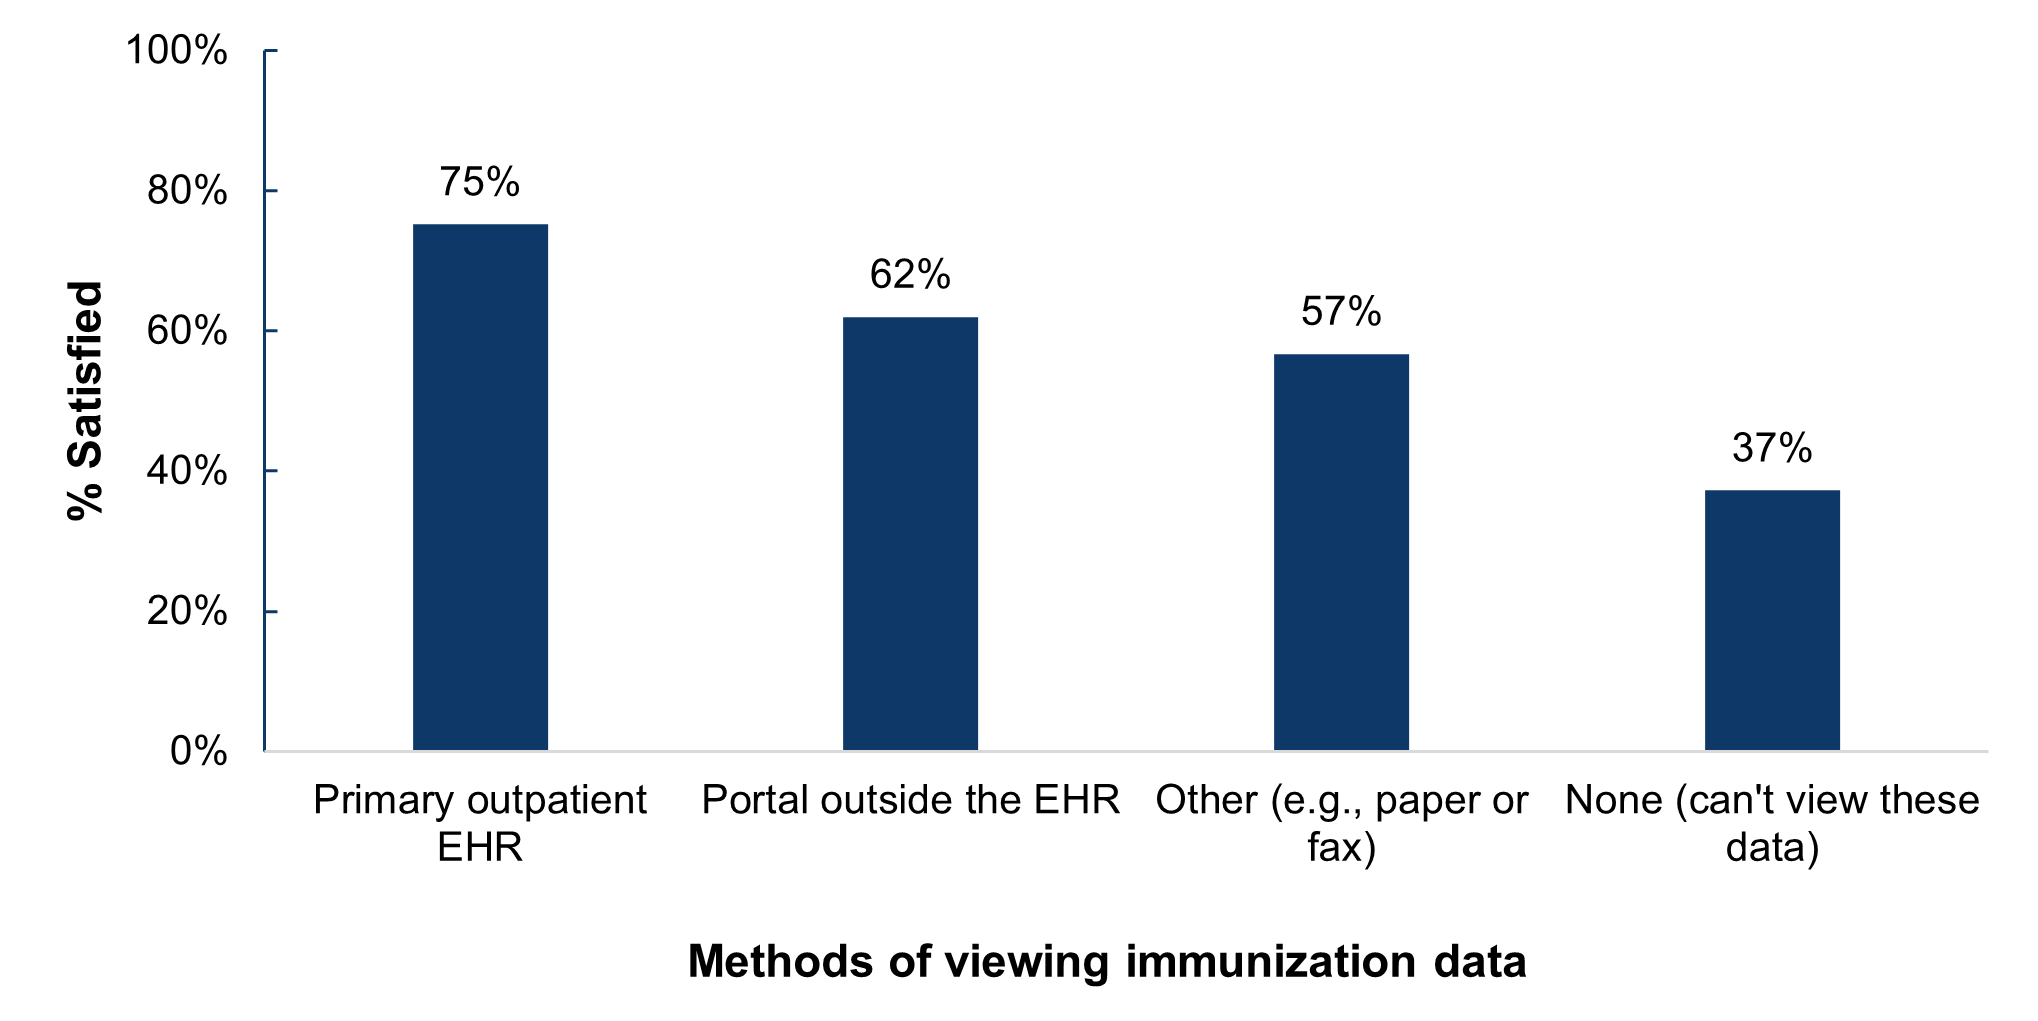 This figure contains a vertical bar chart that displays the percentage of primary care physicians that report satisfaction with various methods of viewing immunization data from outside organizations. The y-axis shows a range of percentages from 0% to 100% to represent the portion of physicians that are satisfied with their access, and the x-axis displays the following categories of methods physicians may use to view immunization data from outside organizations: “Primary outpatient EHR”, “Portal outside the EHR”, “Other (e.g., paper or fax)”, and “None (can’t view these data).”  The chart shows that 75% of primary care physicians that use their primary outpatient EHR to view immunization data from outside organizations were satisfied with their access, 62% of those that used a portal outside the EHR for this purpose were satisfied with their access, 57% that used another method were satisfied with their access, and that 37% of primary care physicians that were not able to view immunization data from outside organizations were satisfied with their access to this data.